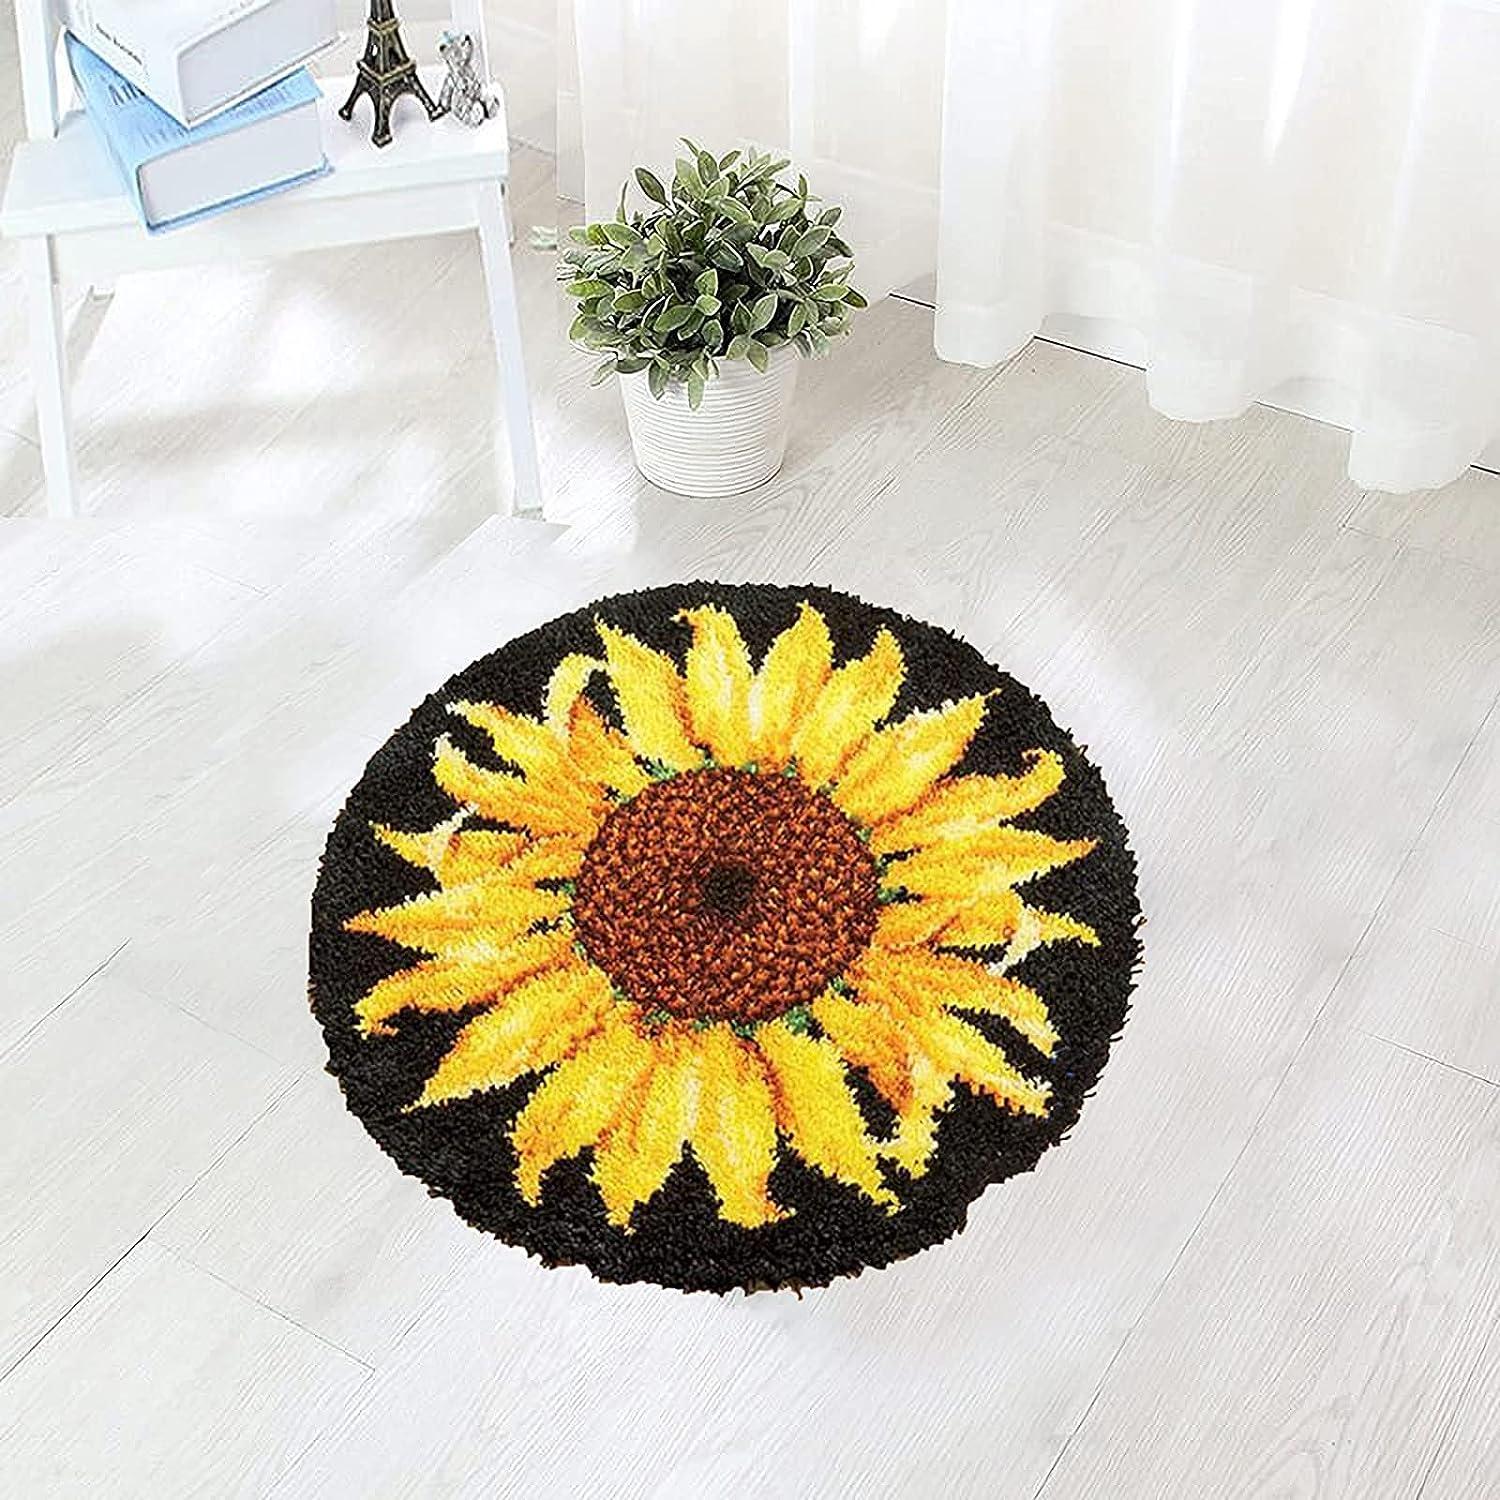 Space Planet Round Shape Latch Hook Kits Pre-Printed Rug DIY Crochet Yarn  Embroidery Needlework Hook and Latch Kit Carpet Cushion Cover Home Sofa